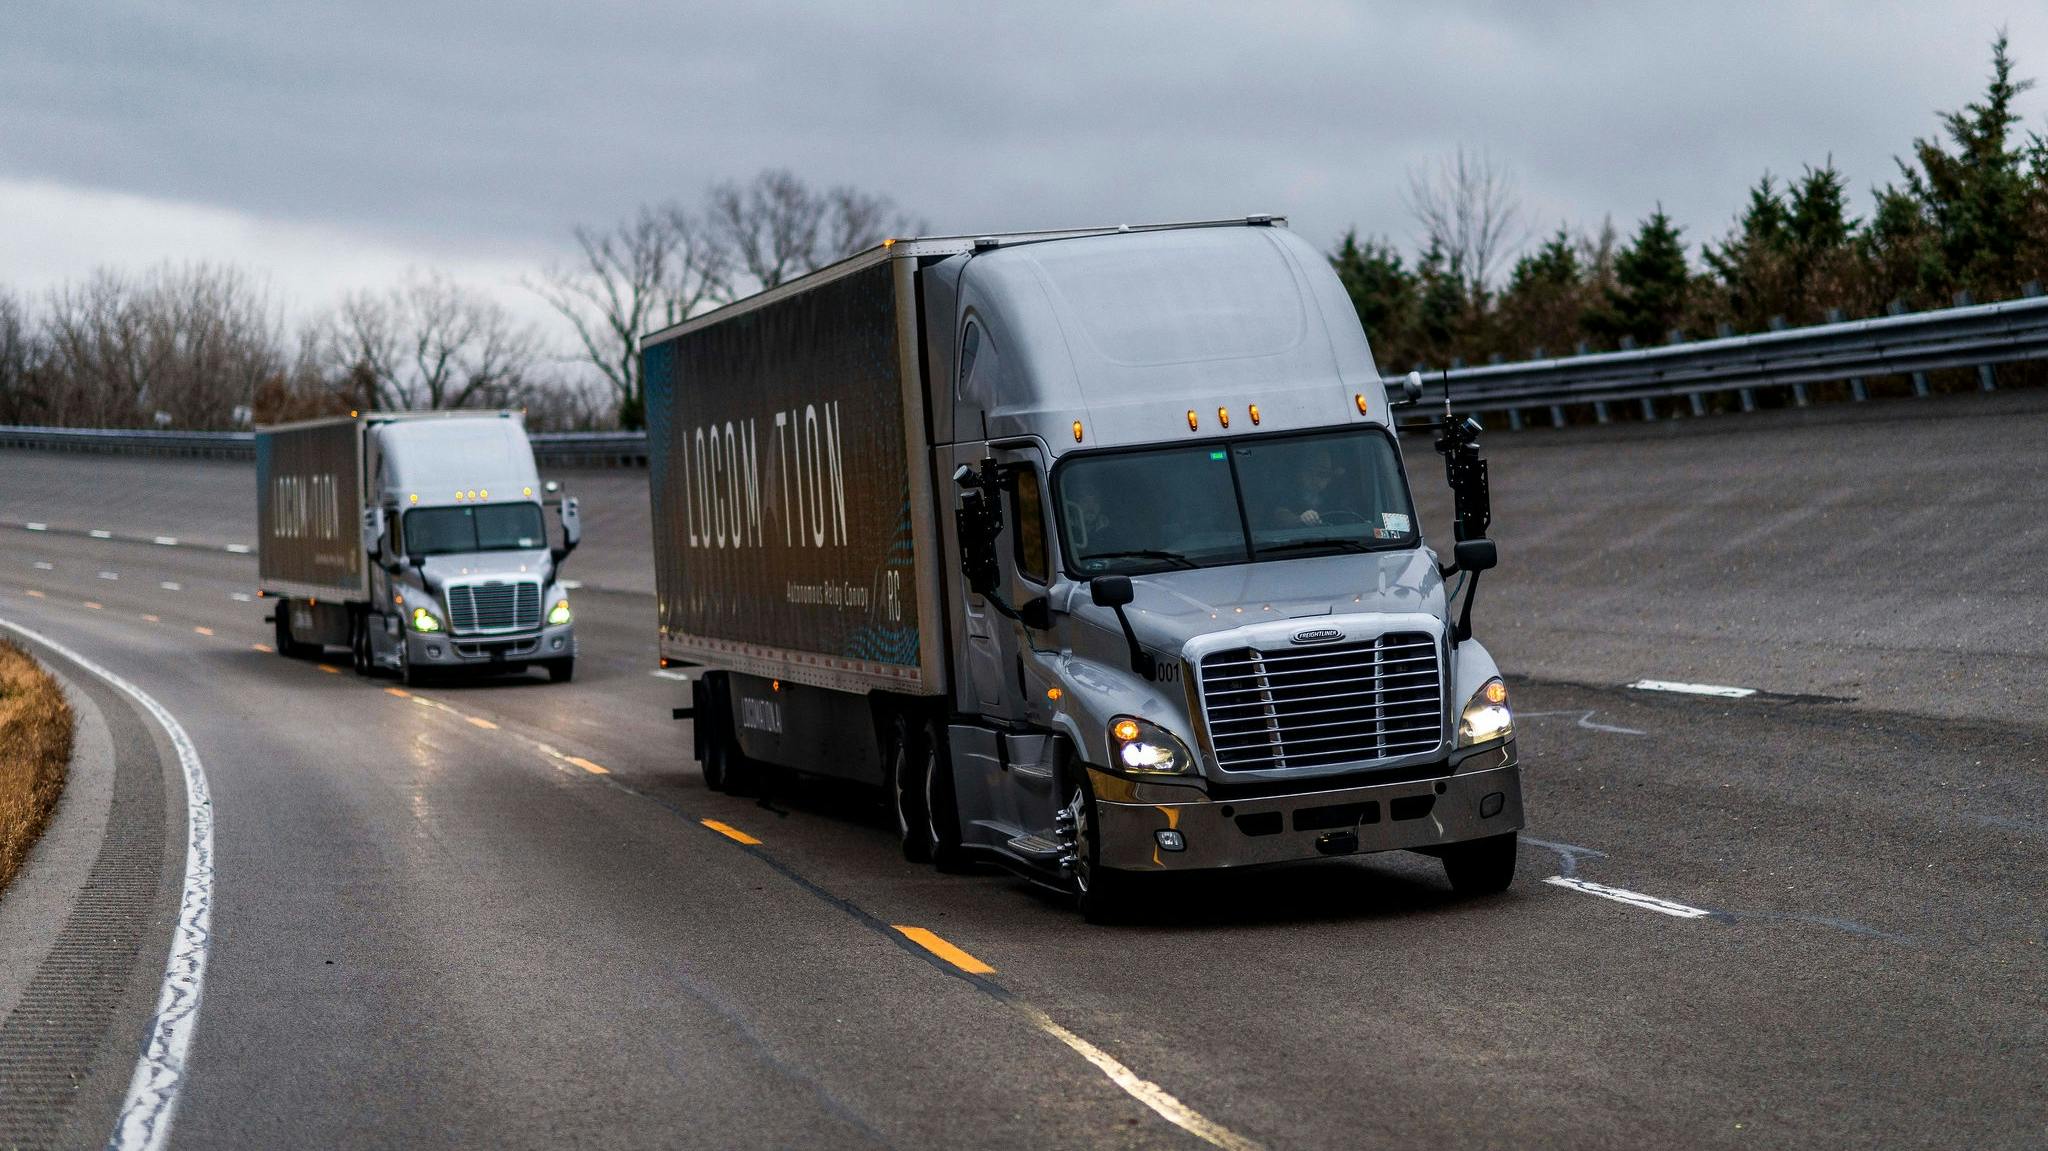 Aurora's self-driving semis aim to be on Texas highways by 2024